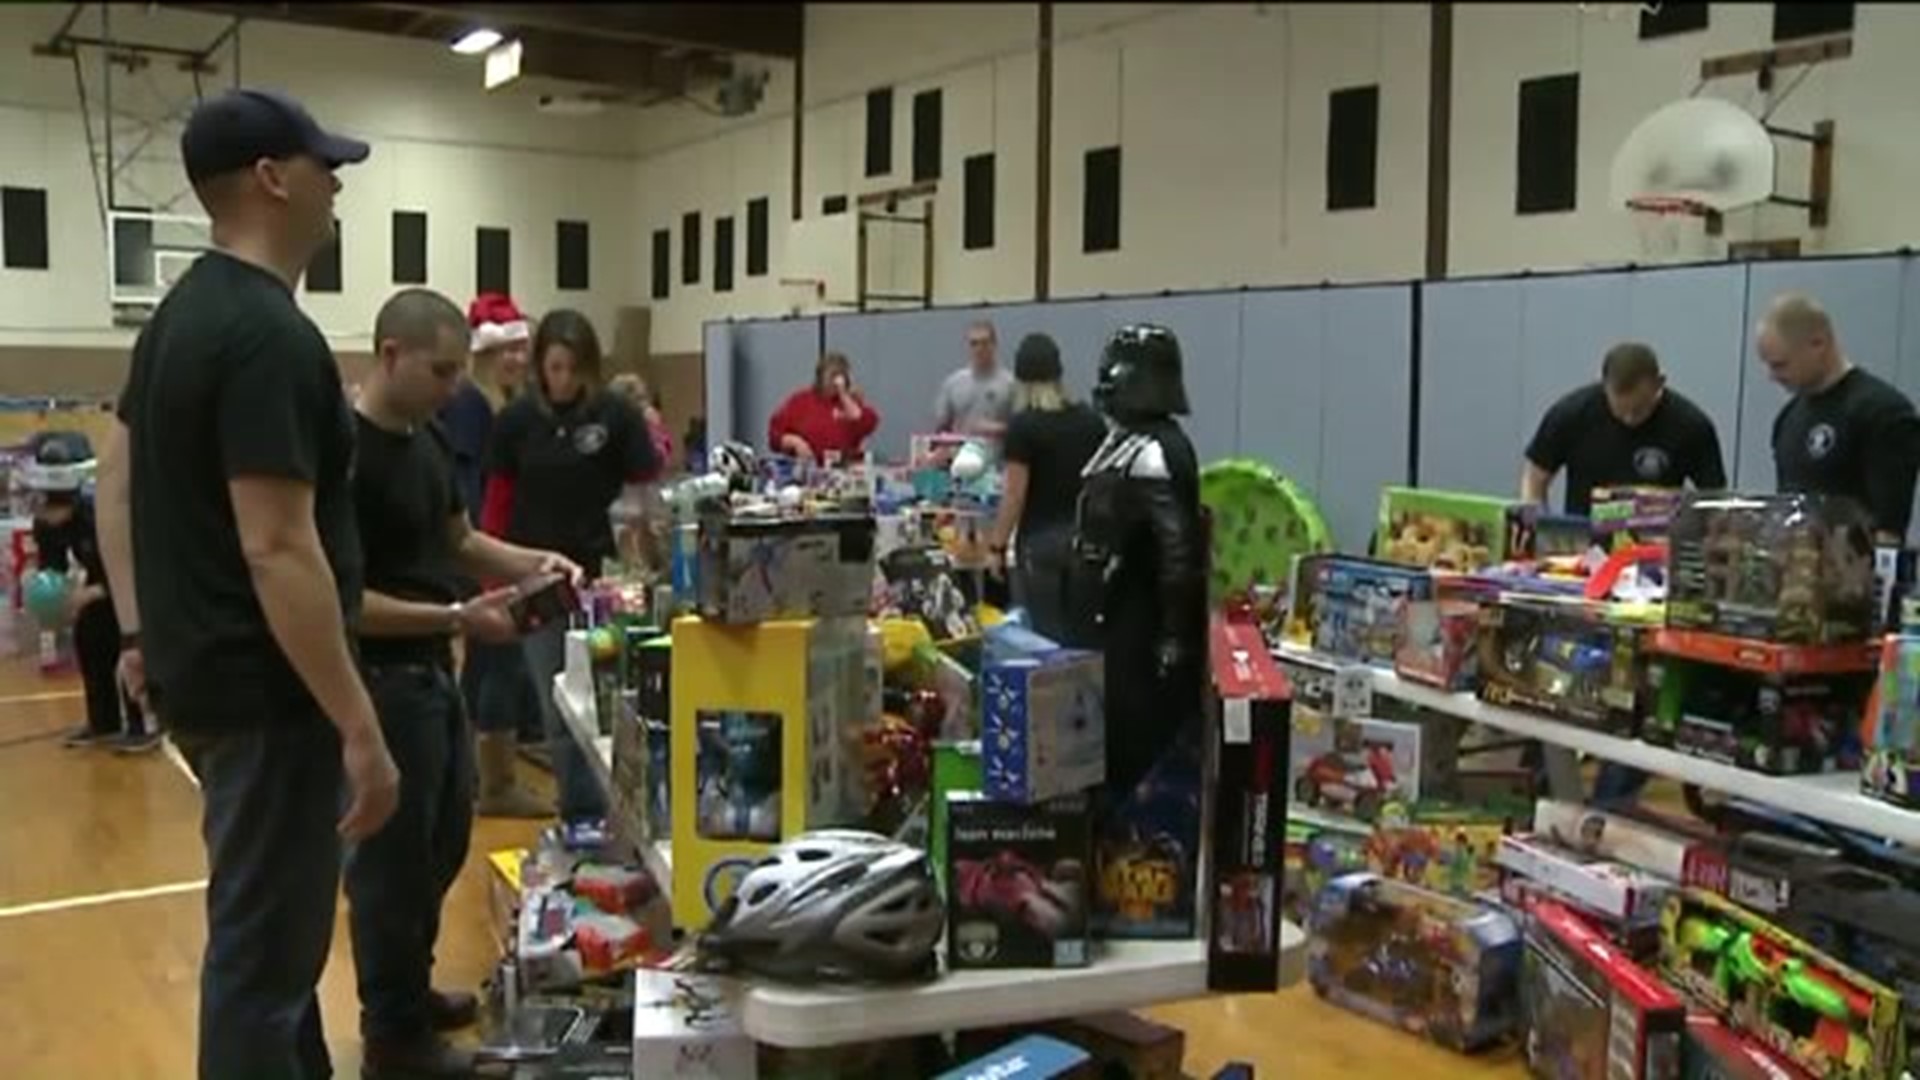 Police Prepare for Toy Drive, Help Thousands